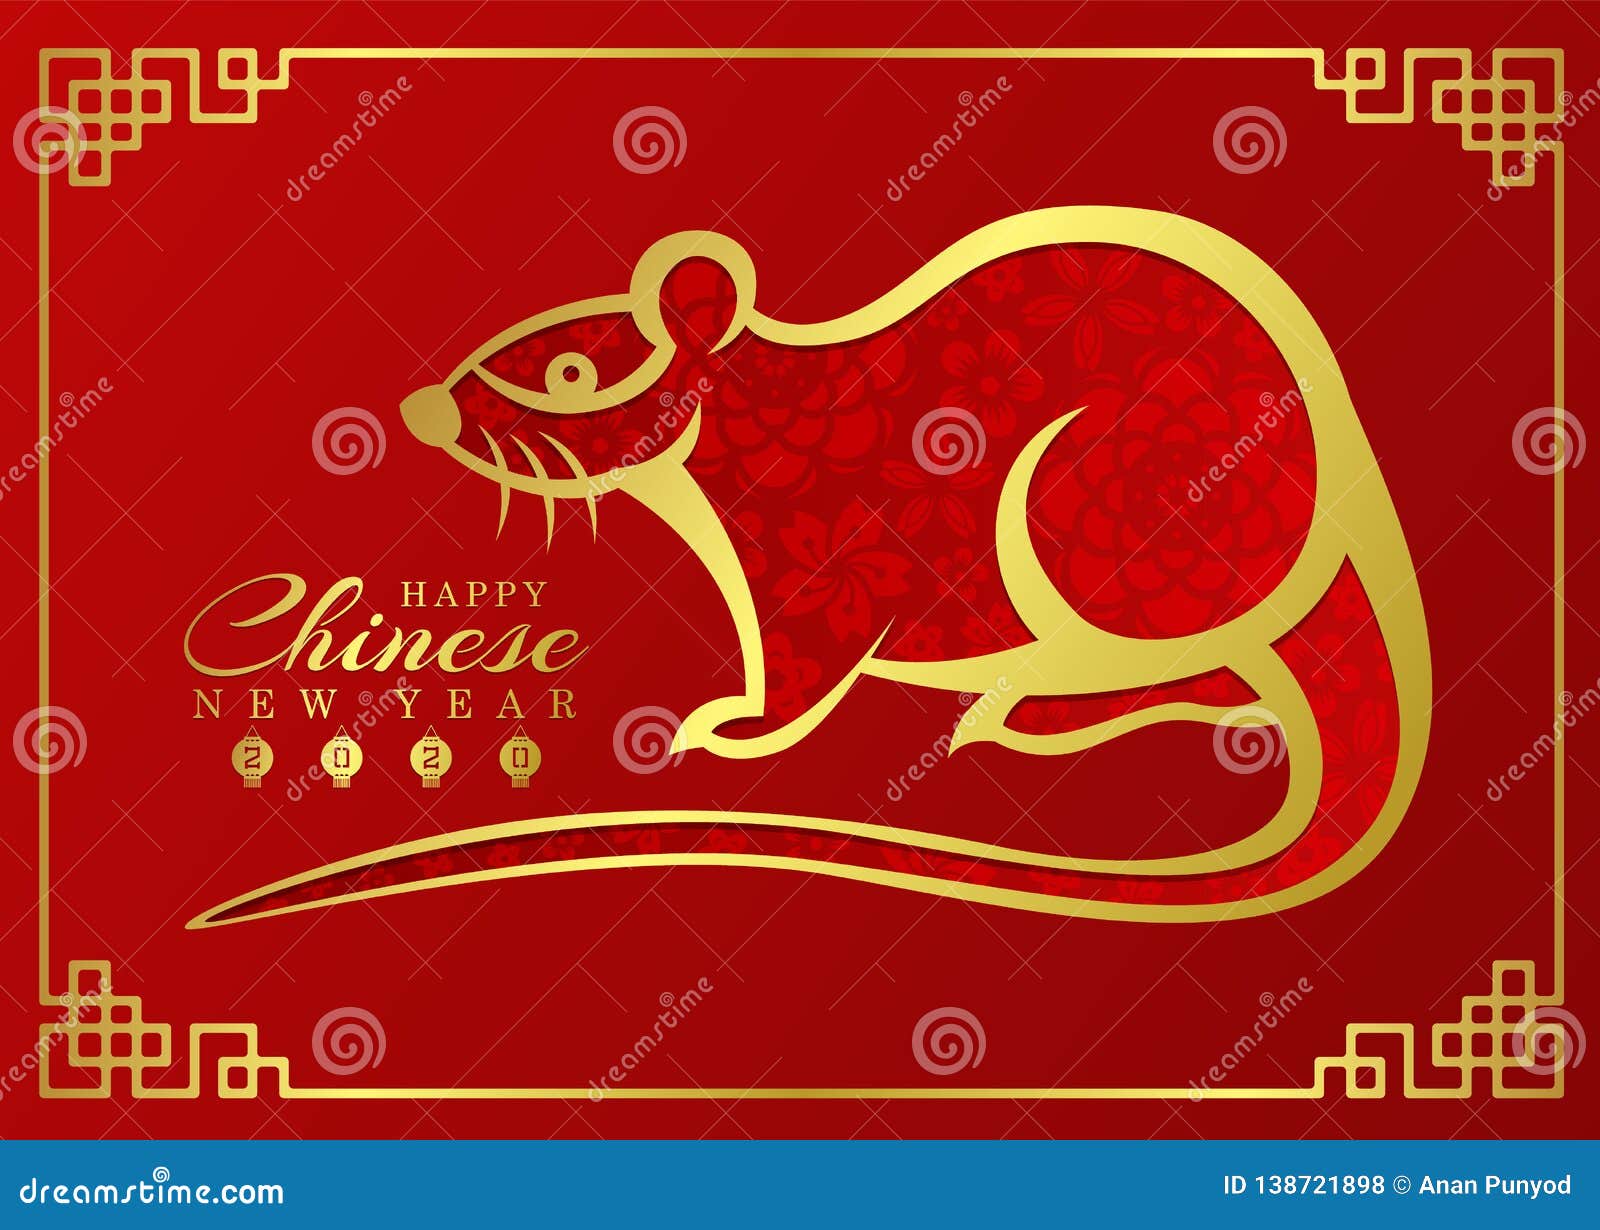 Chinese New Year 2020 Card With Abstract Gold Border Line Rat Zodiac And Abstract ...